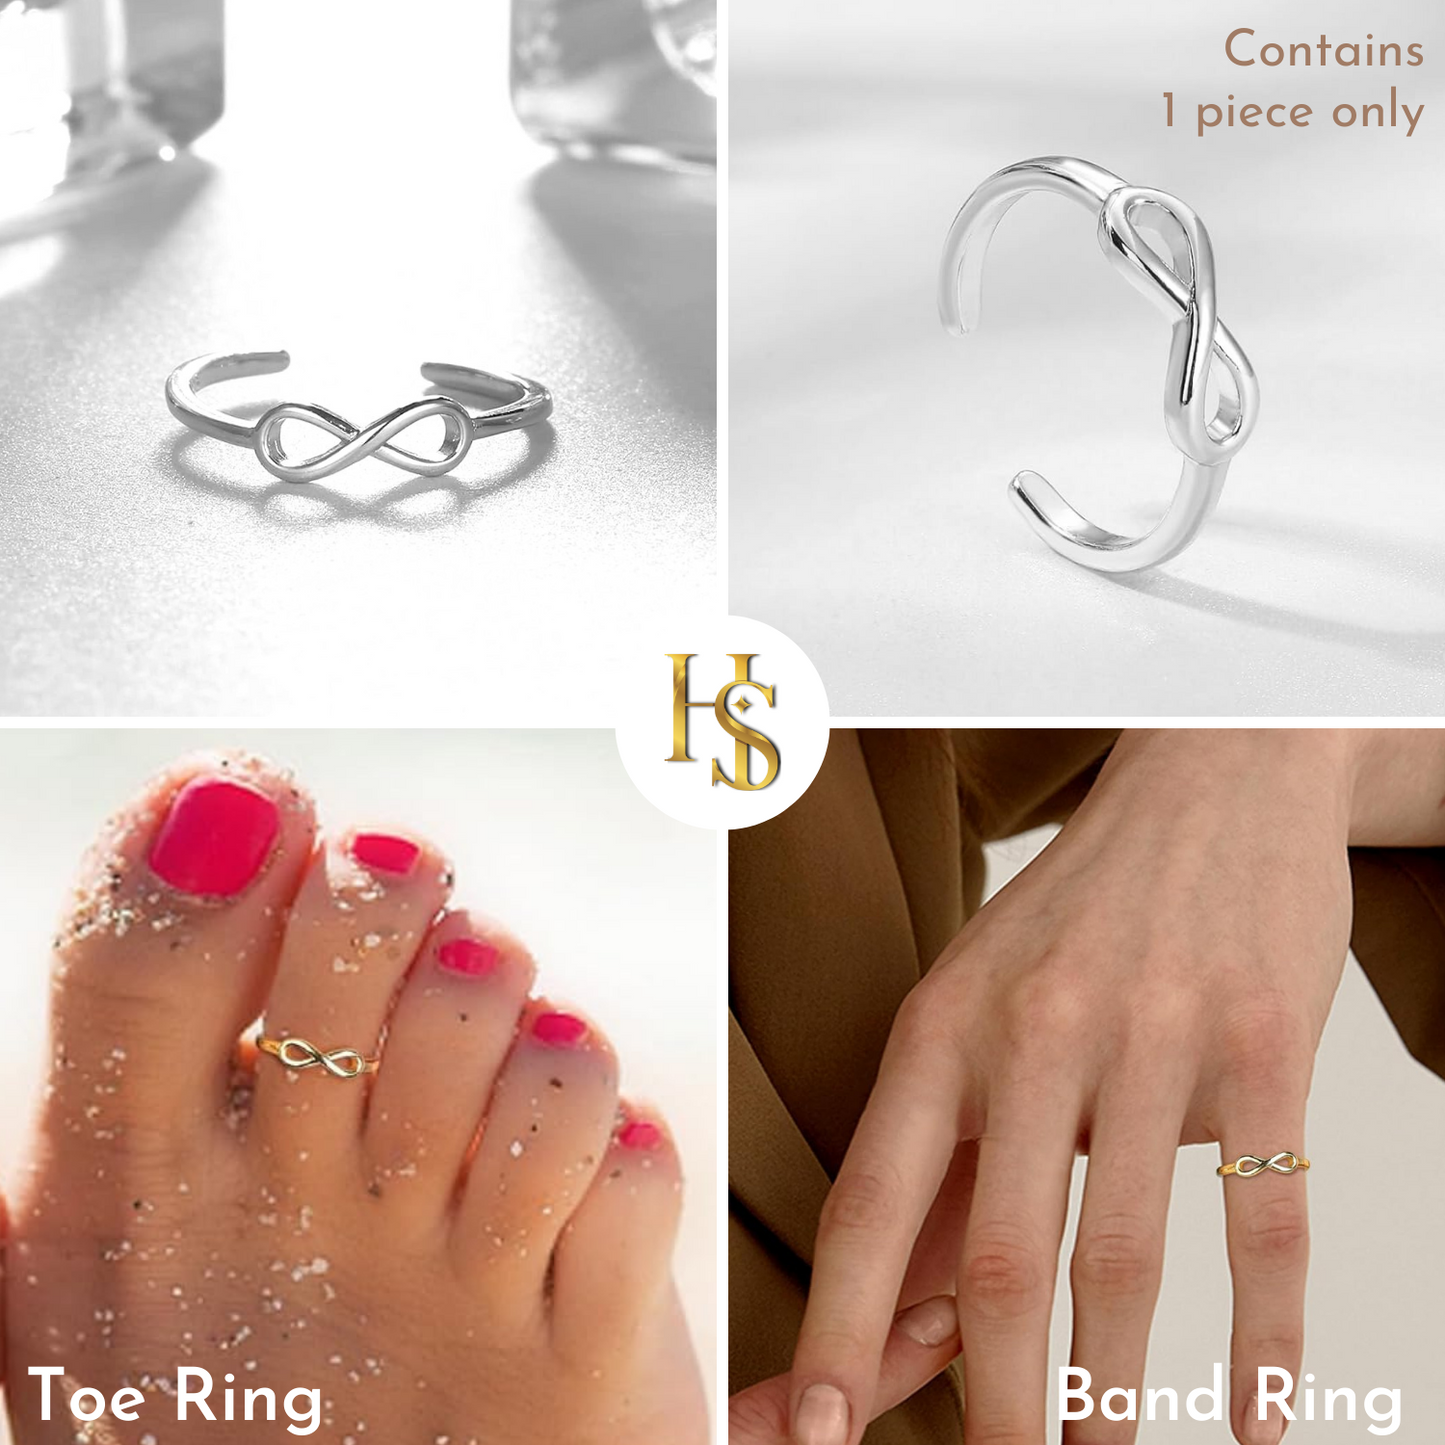 Eternal Infinity Toe Ring - Band Ring - 925 Sterling Silver - 1 Piece